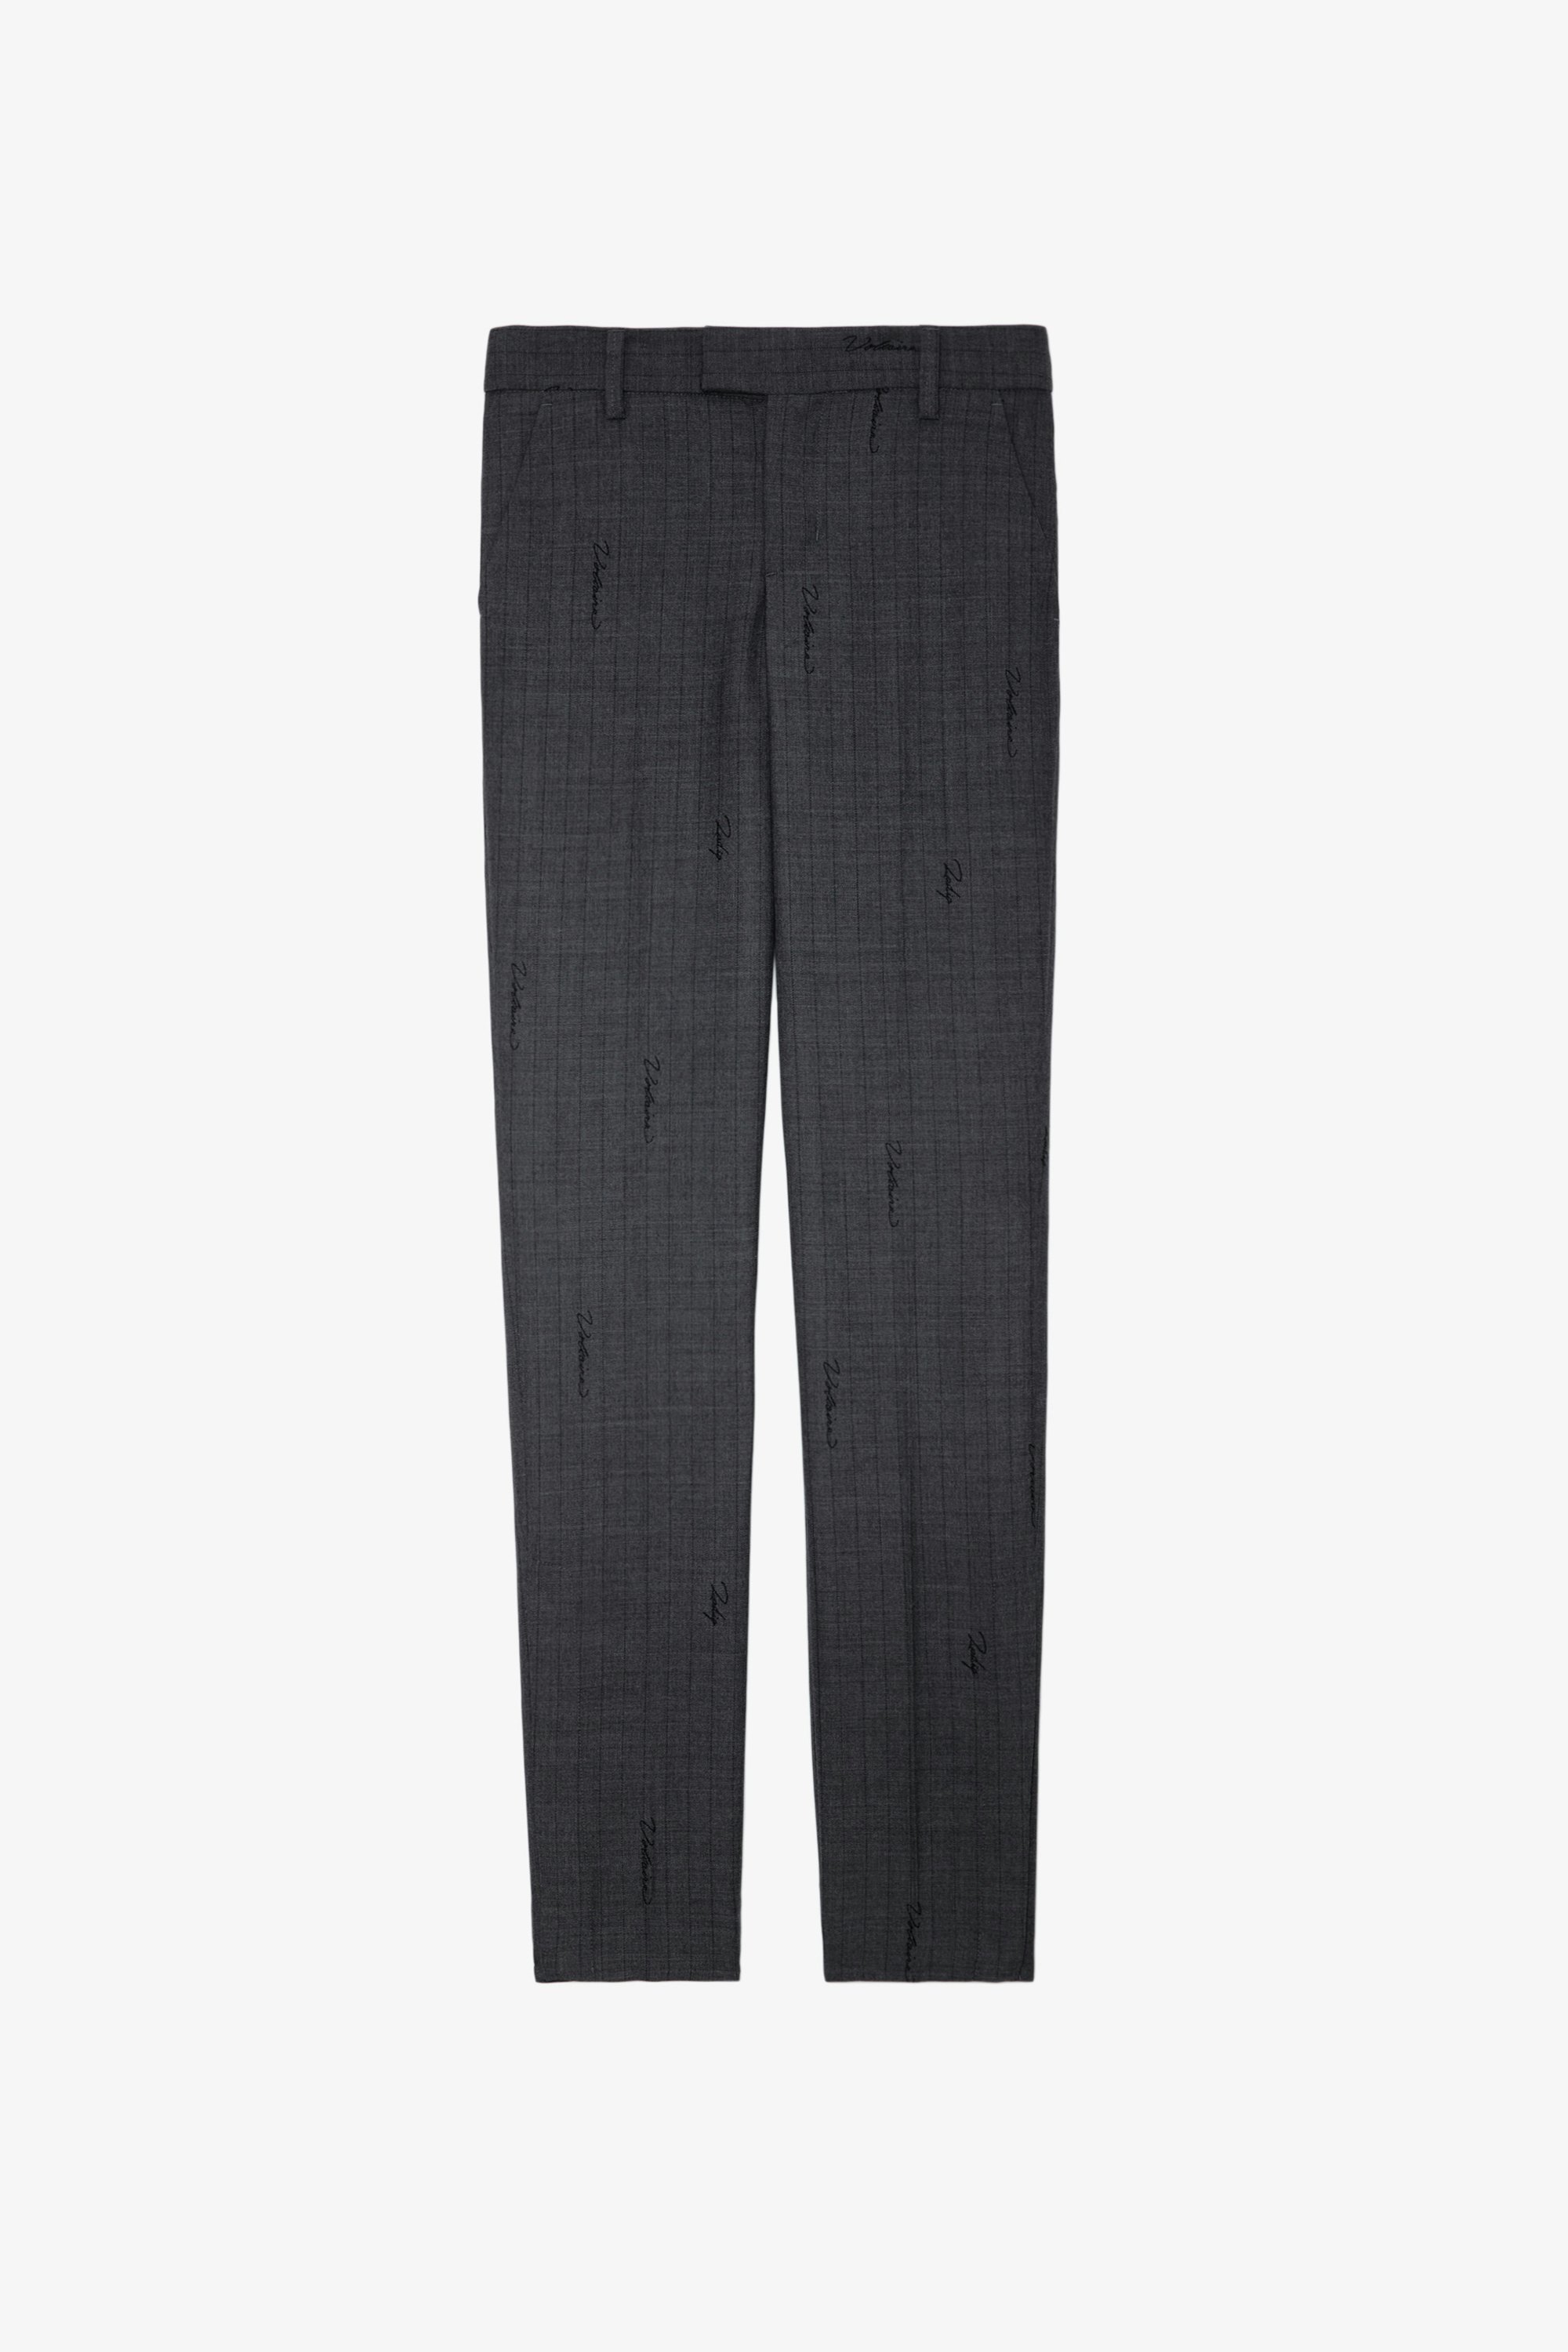 Prune Trousers - Women’s anthracite tailored trousers with stripes, monogram and zip hem.